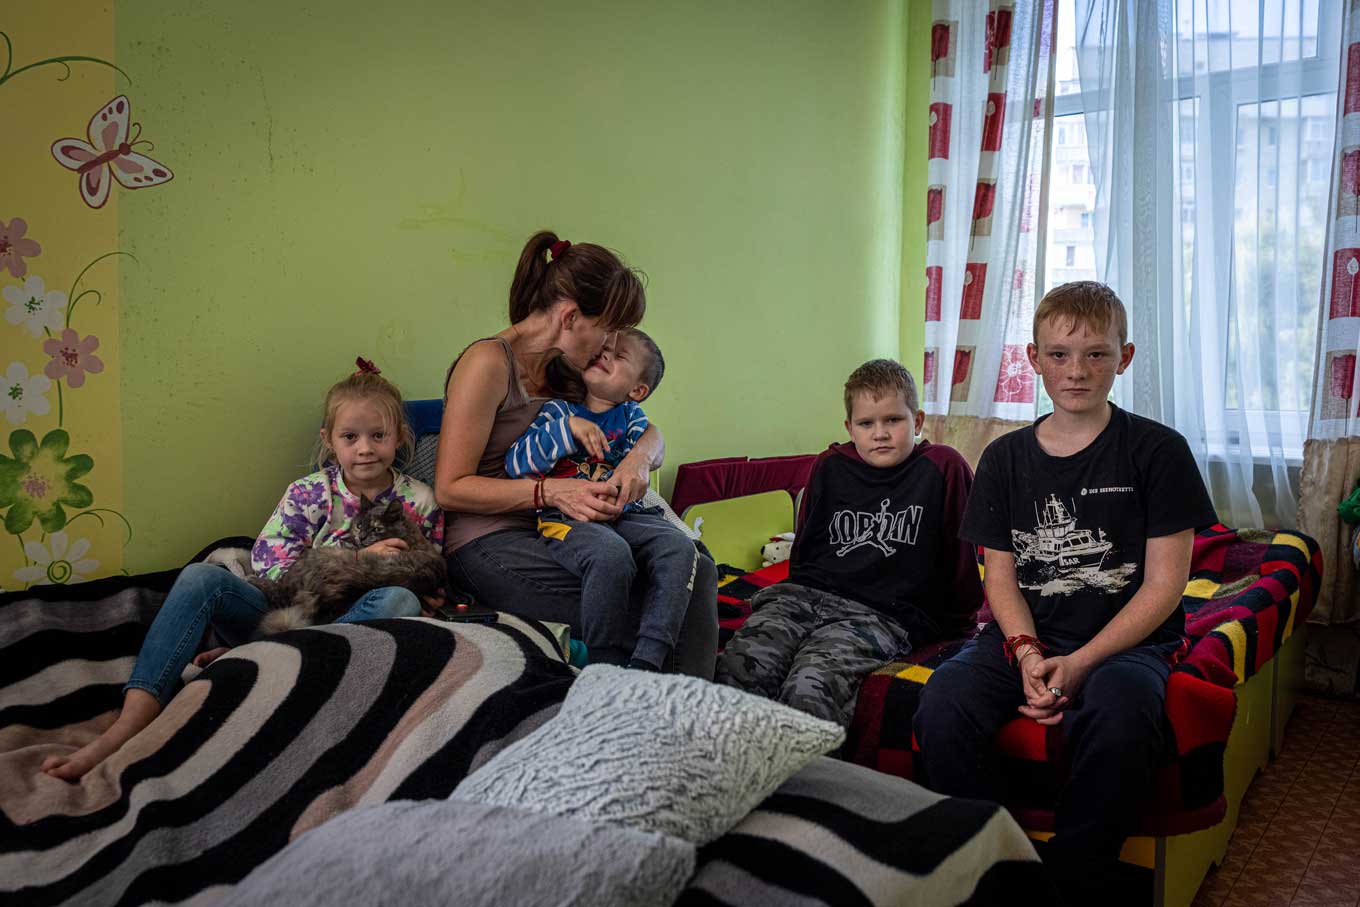 A Ukrainian mother poses with her children in a converted school